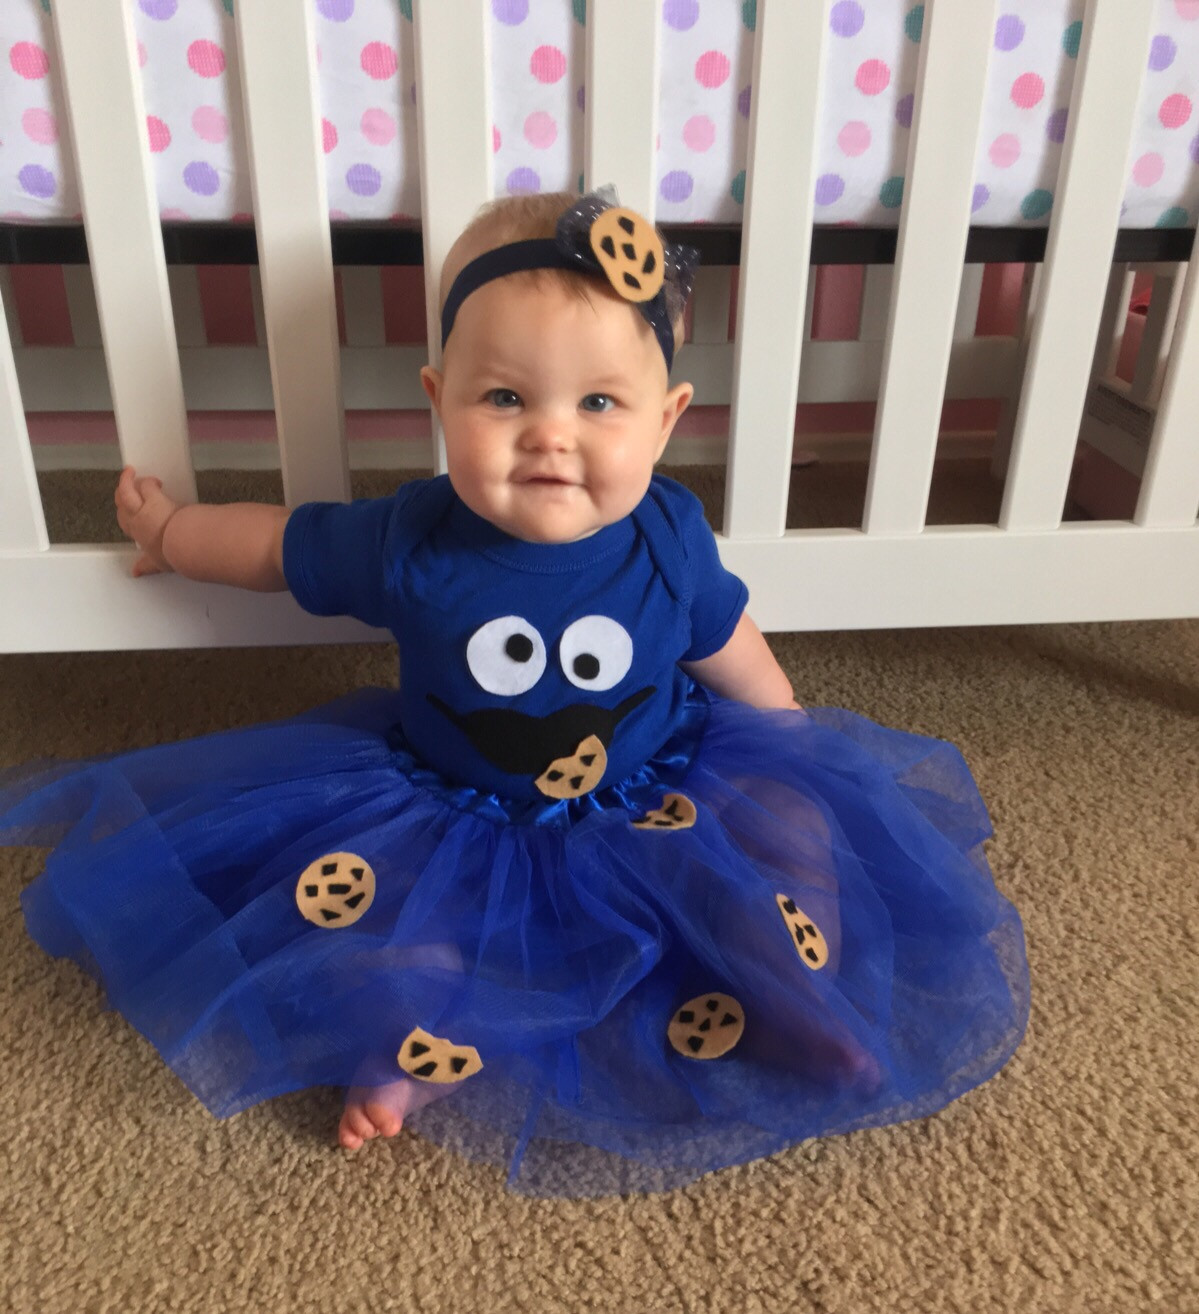 DIY Toddler Monster Costume
 DIY Cookie Monster costume baby & toddler no sewing